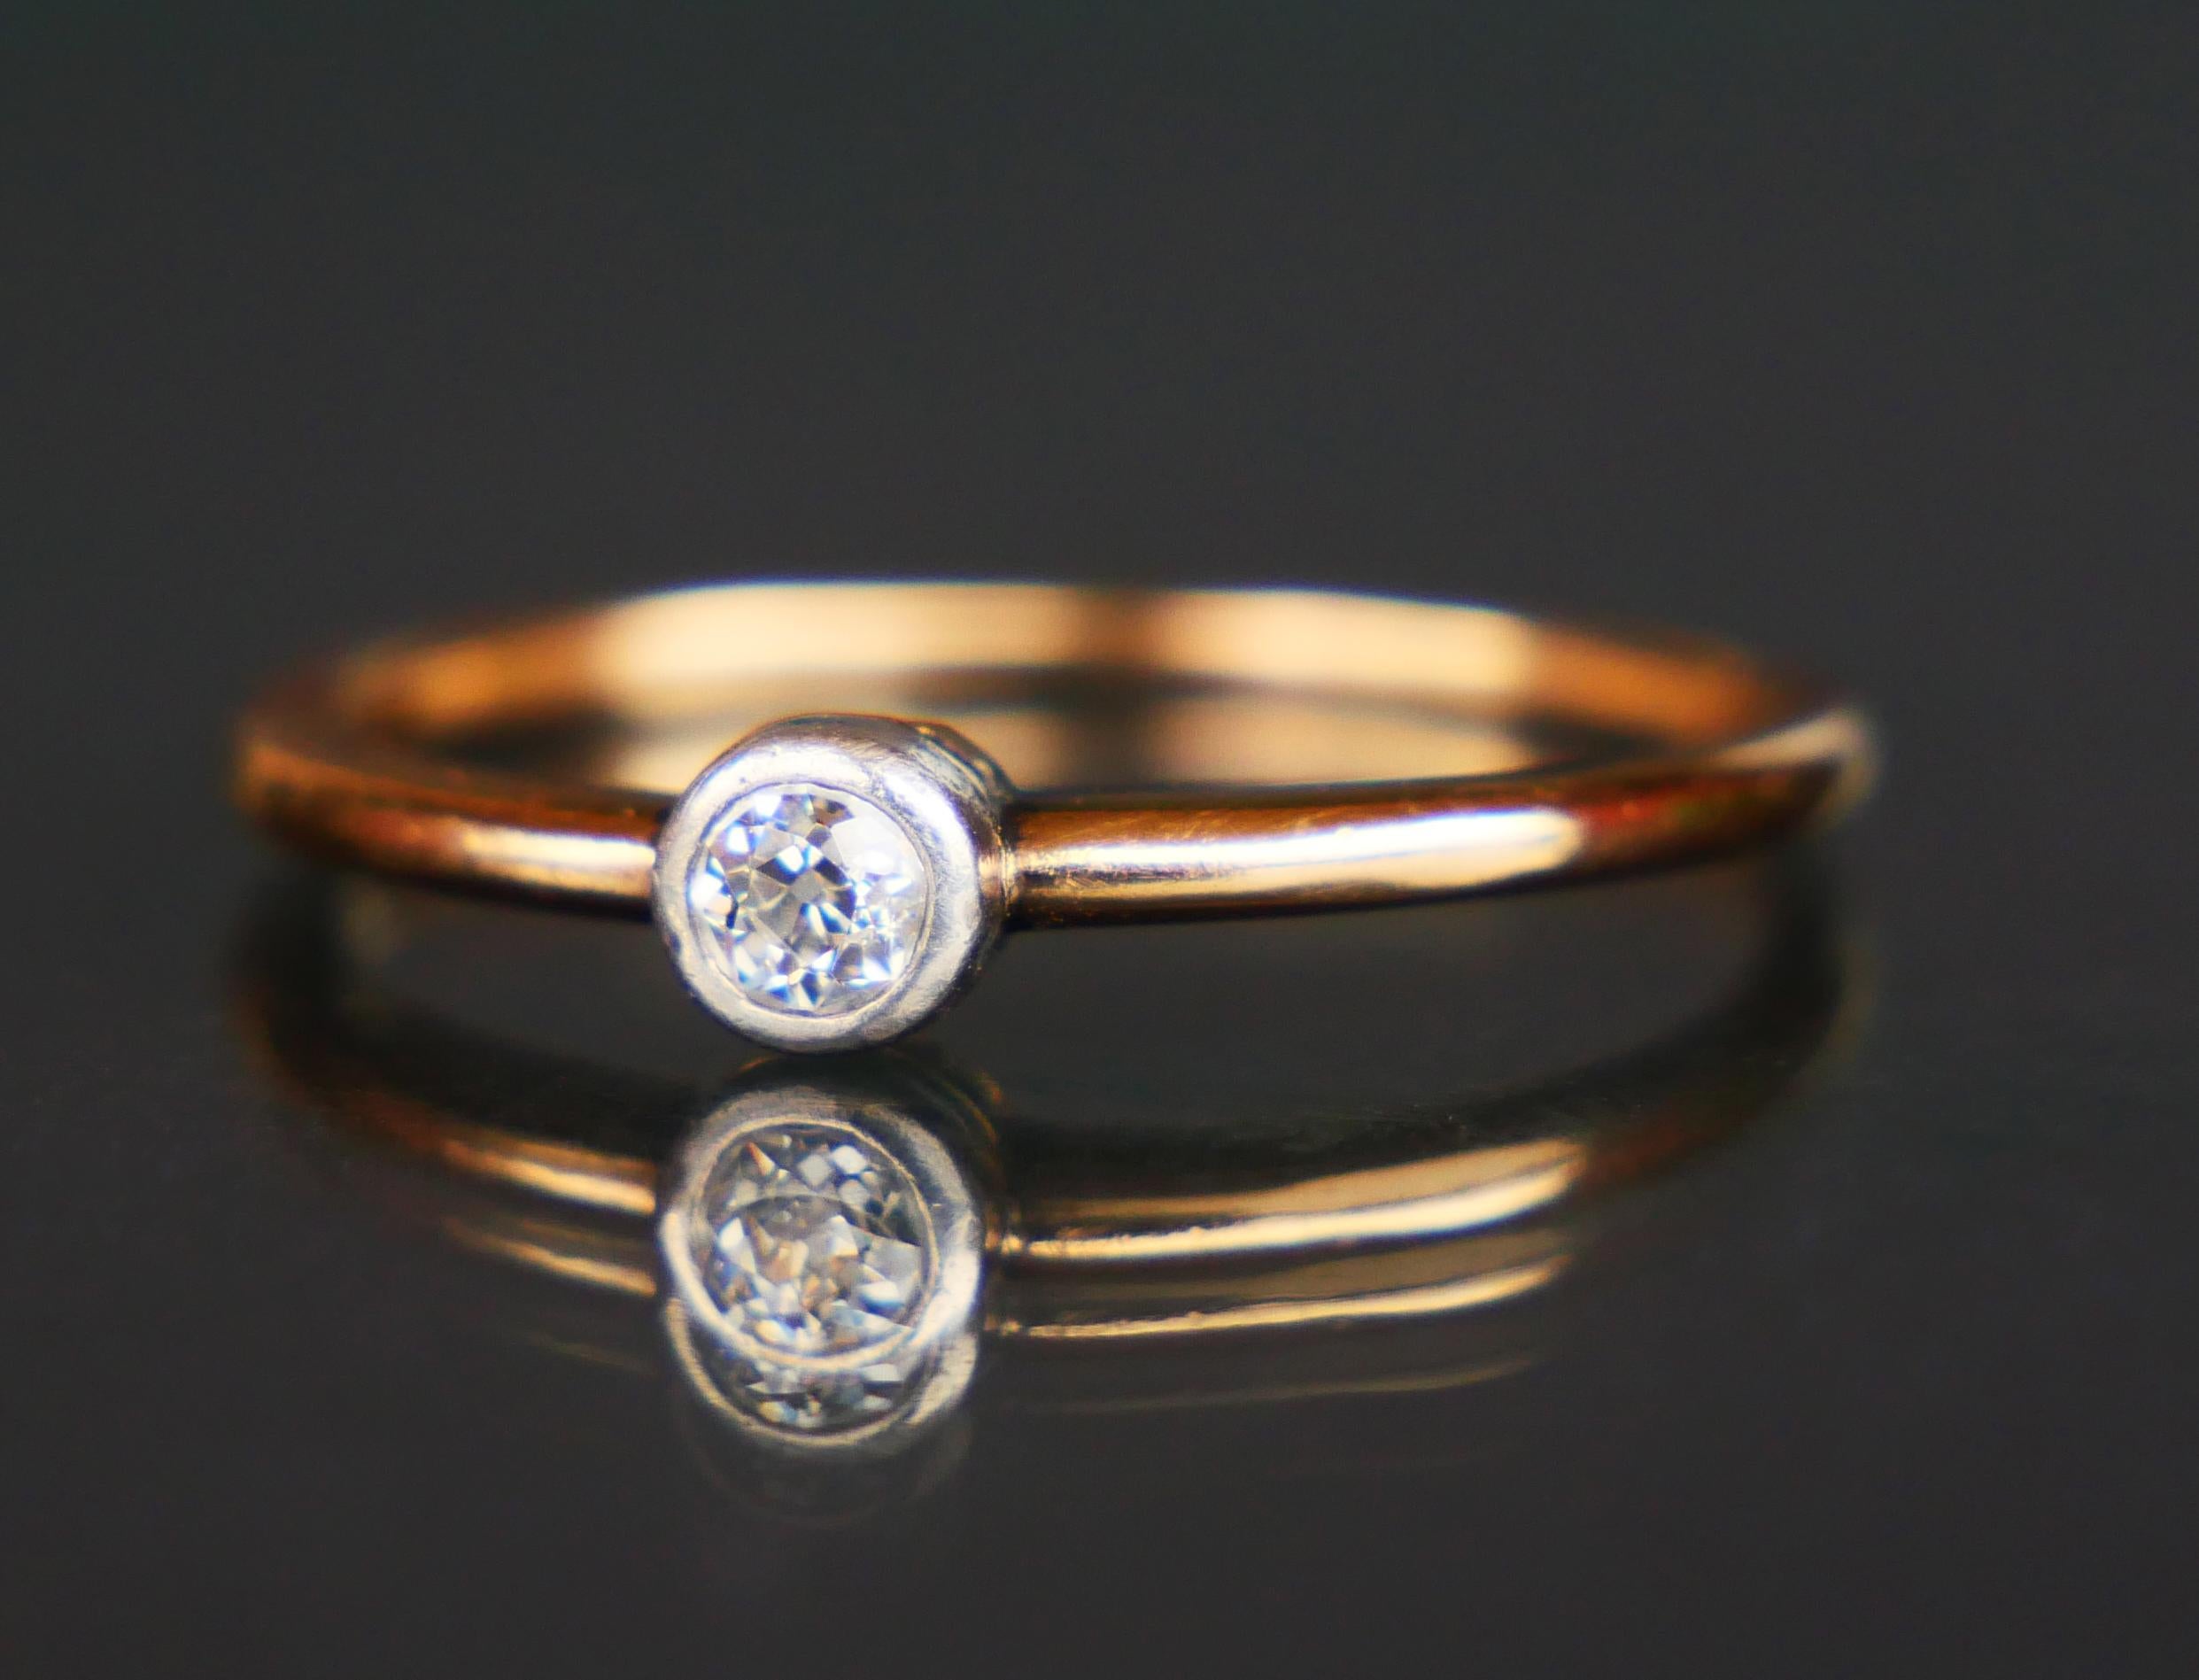 Antique Ring 0.2 ct. Diamond solid 14K Yellow Gold Silver Ø US5.75 / 1.3 gr. For Sale 2